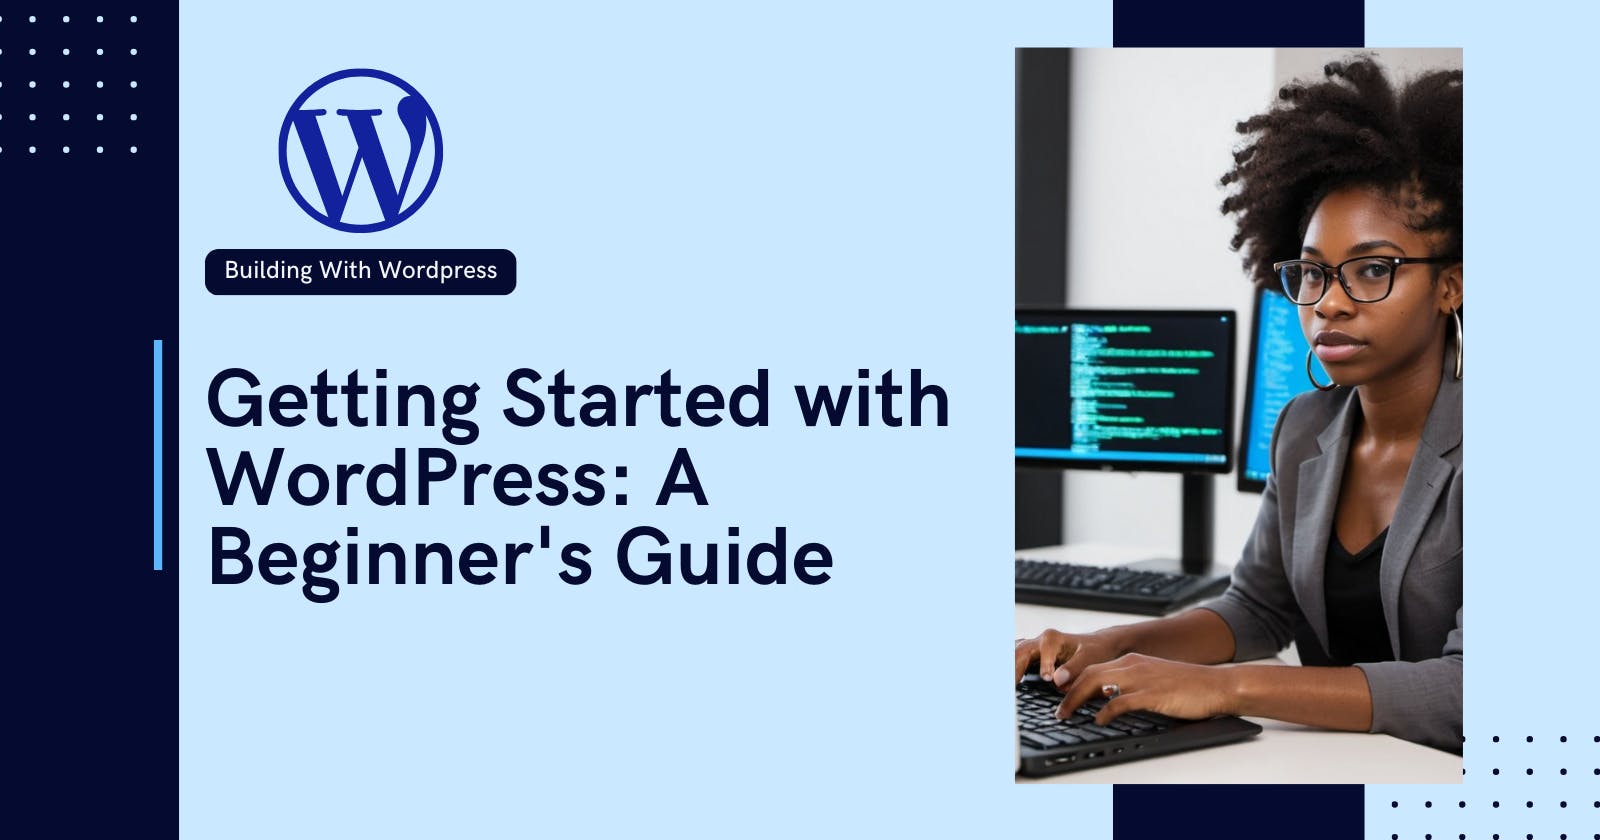 Getting Started with WordPress: A Beginner's Guide